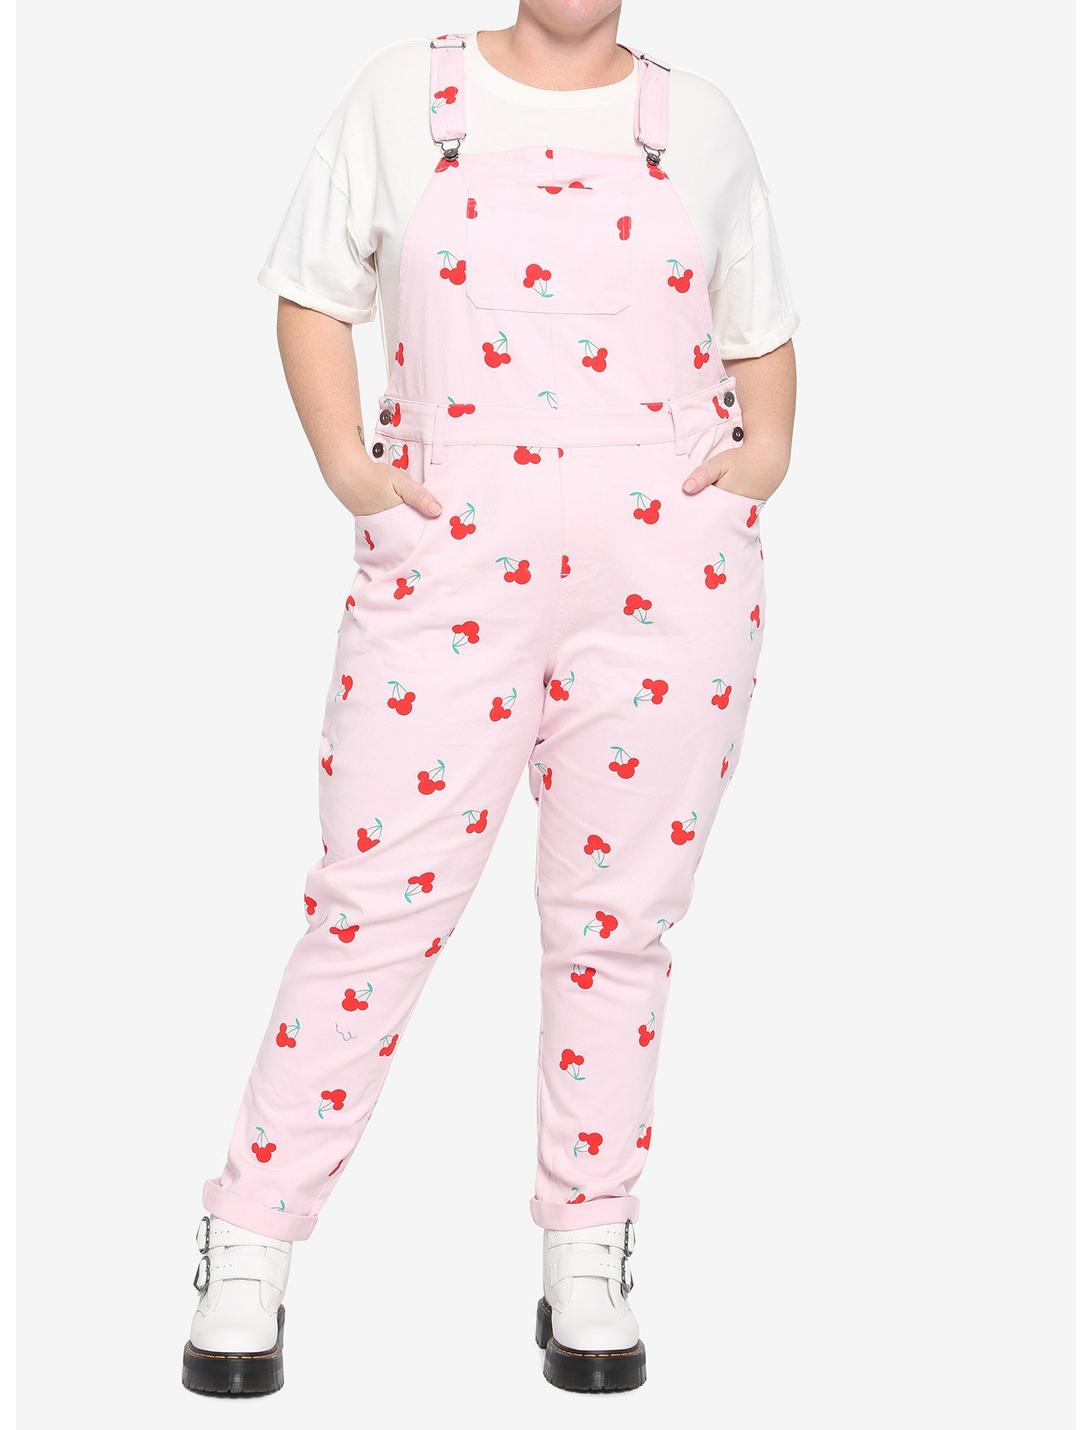 Her Universe Disney Minnie Mouse Cherry Overalls Plus Size, RED, hi-res